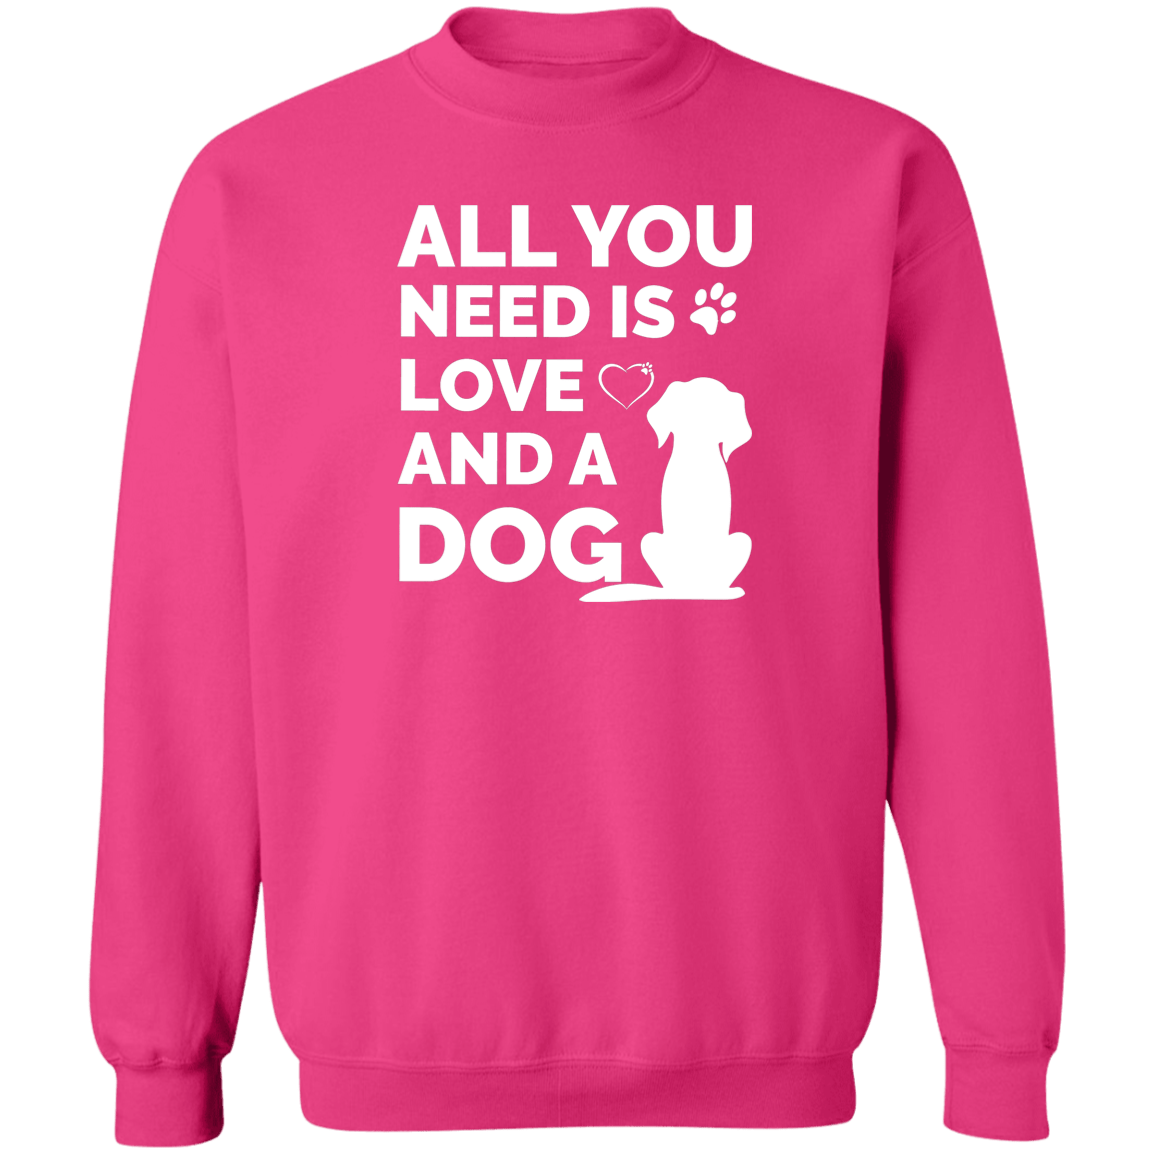 All You Need Is Love And A Dog - Sweatshirt.